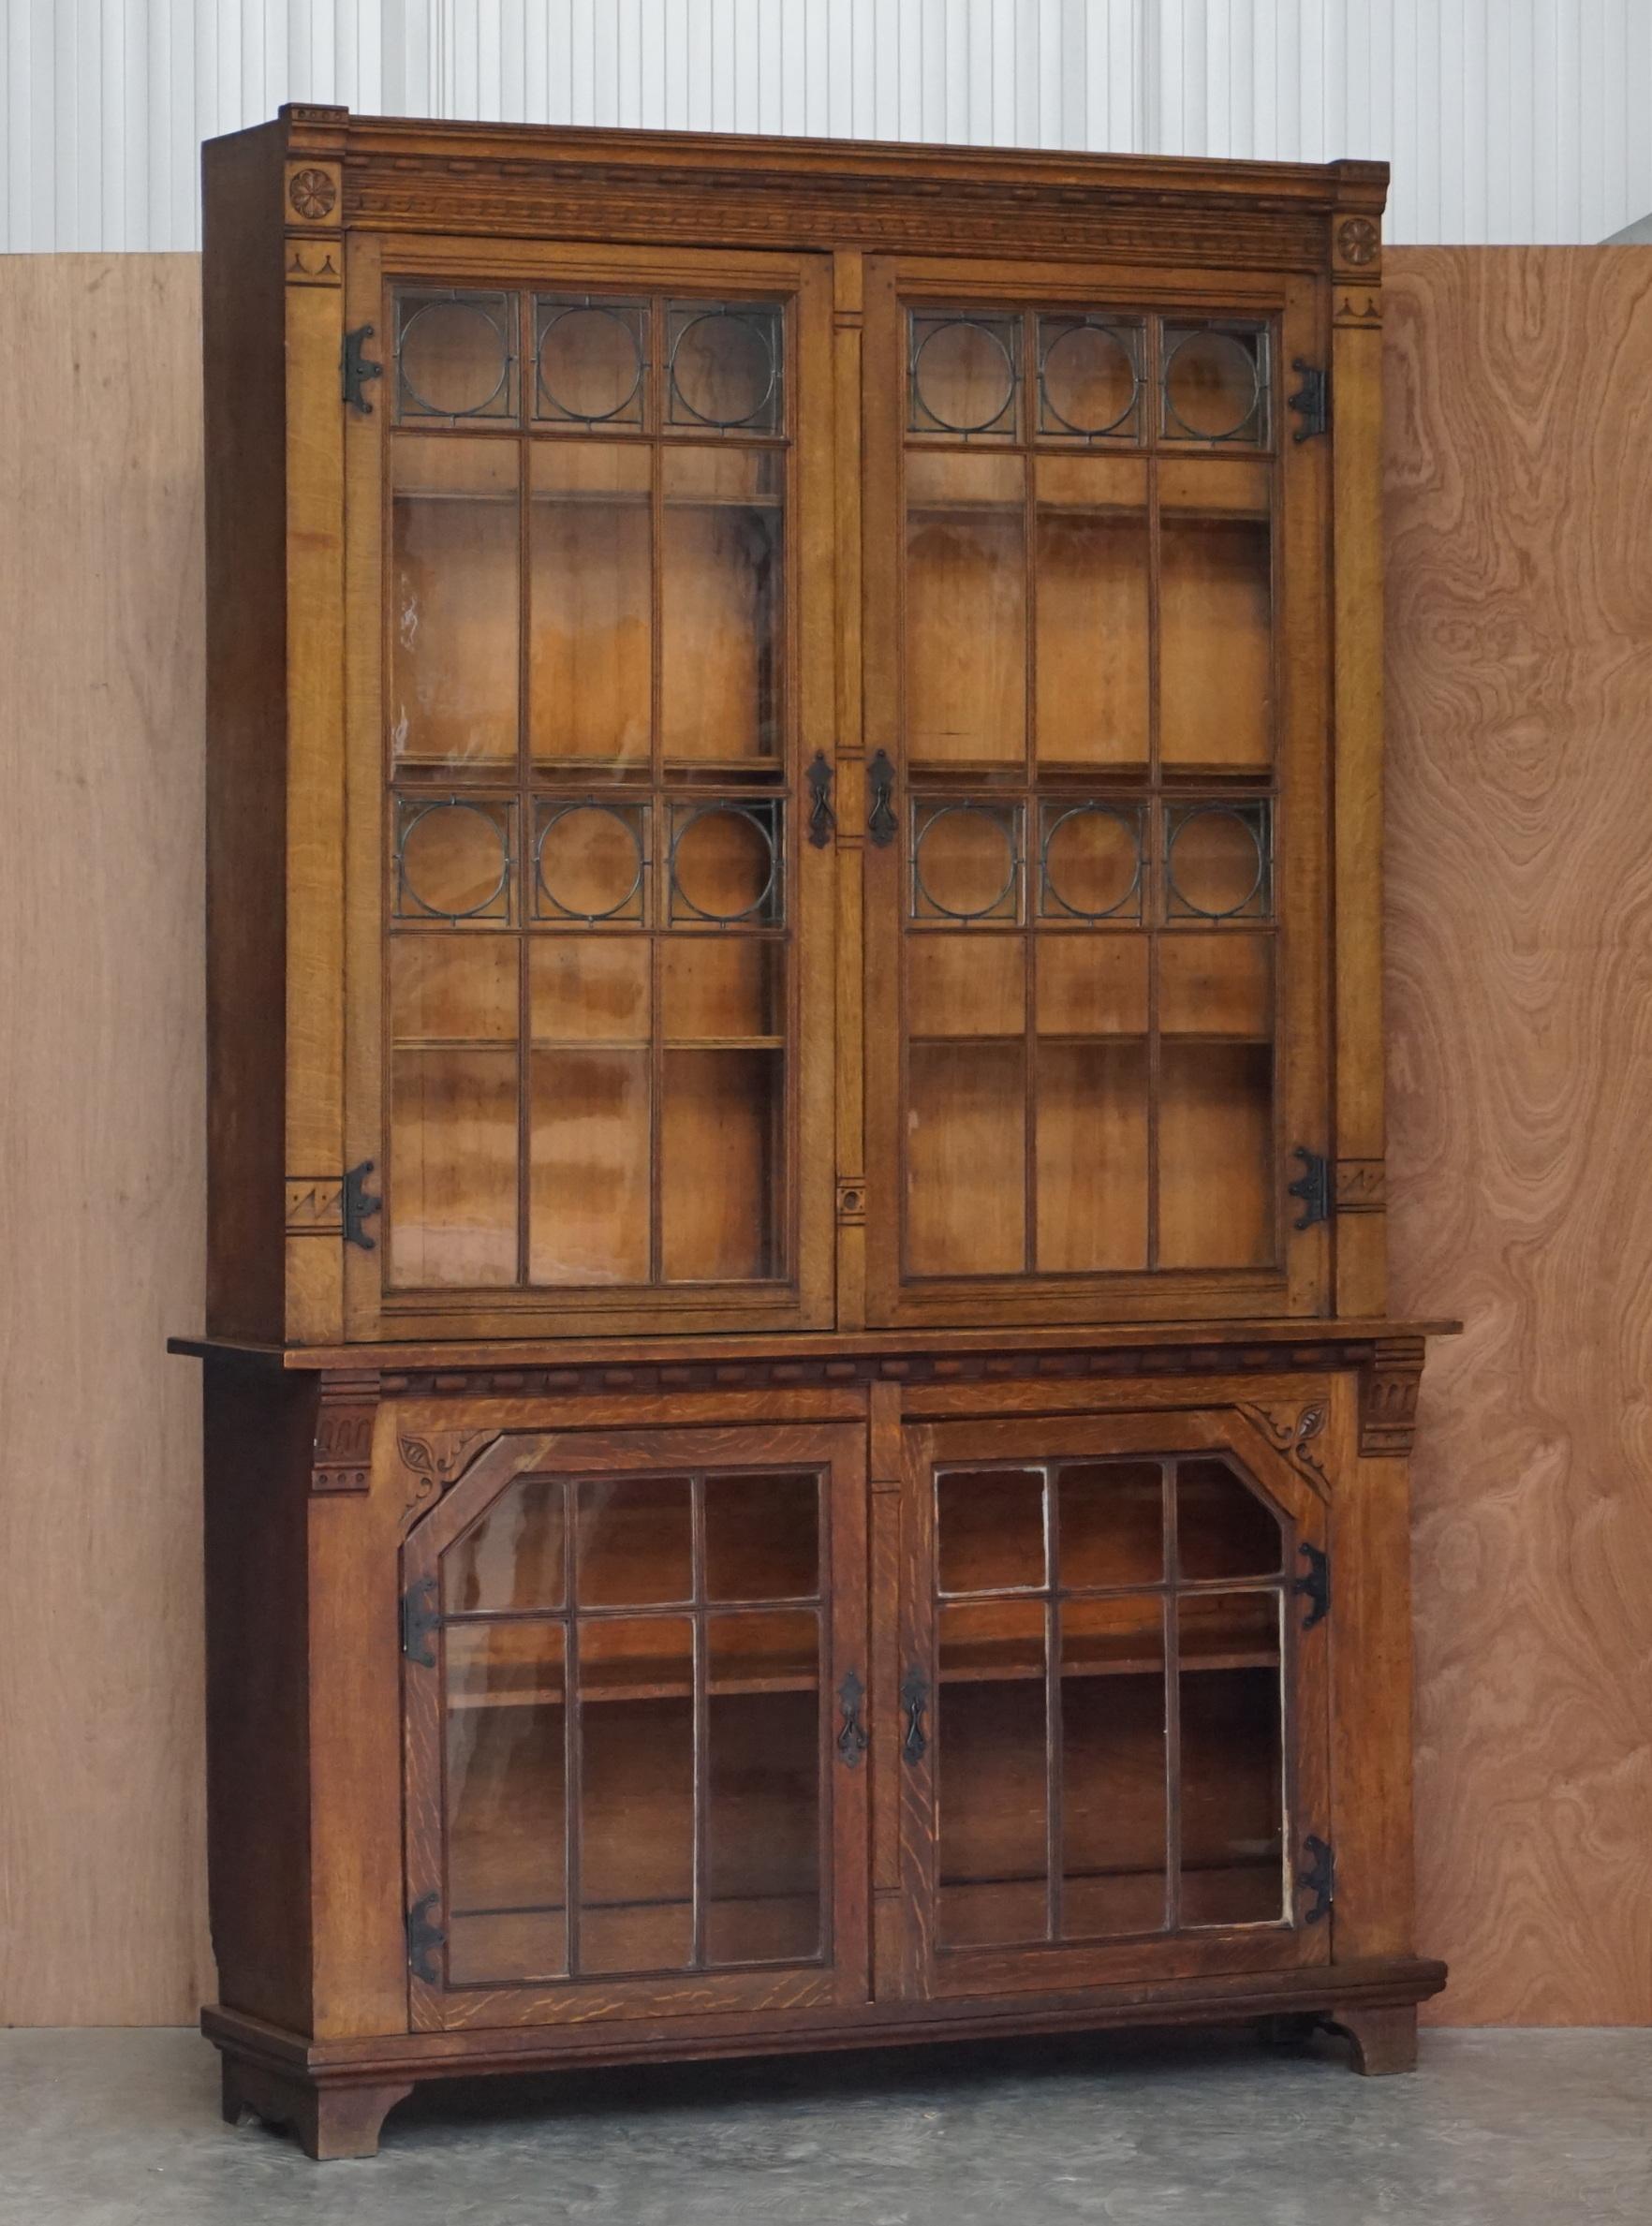 We are delighted to offer this exquisite pair of really quite huge English oak library bookcases with wrought iron fixtures and fittings and lead lined glass doors 

A beautifully made pair, these can hold an entire at home library and more, they